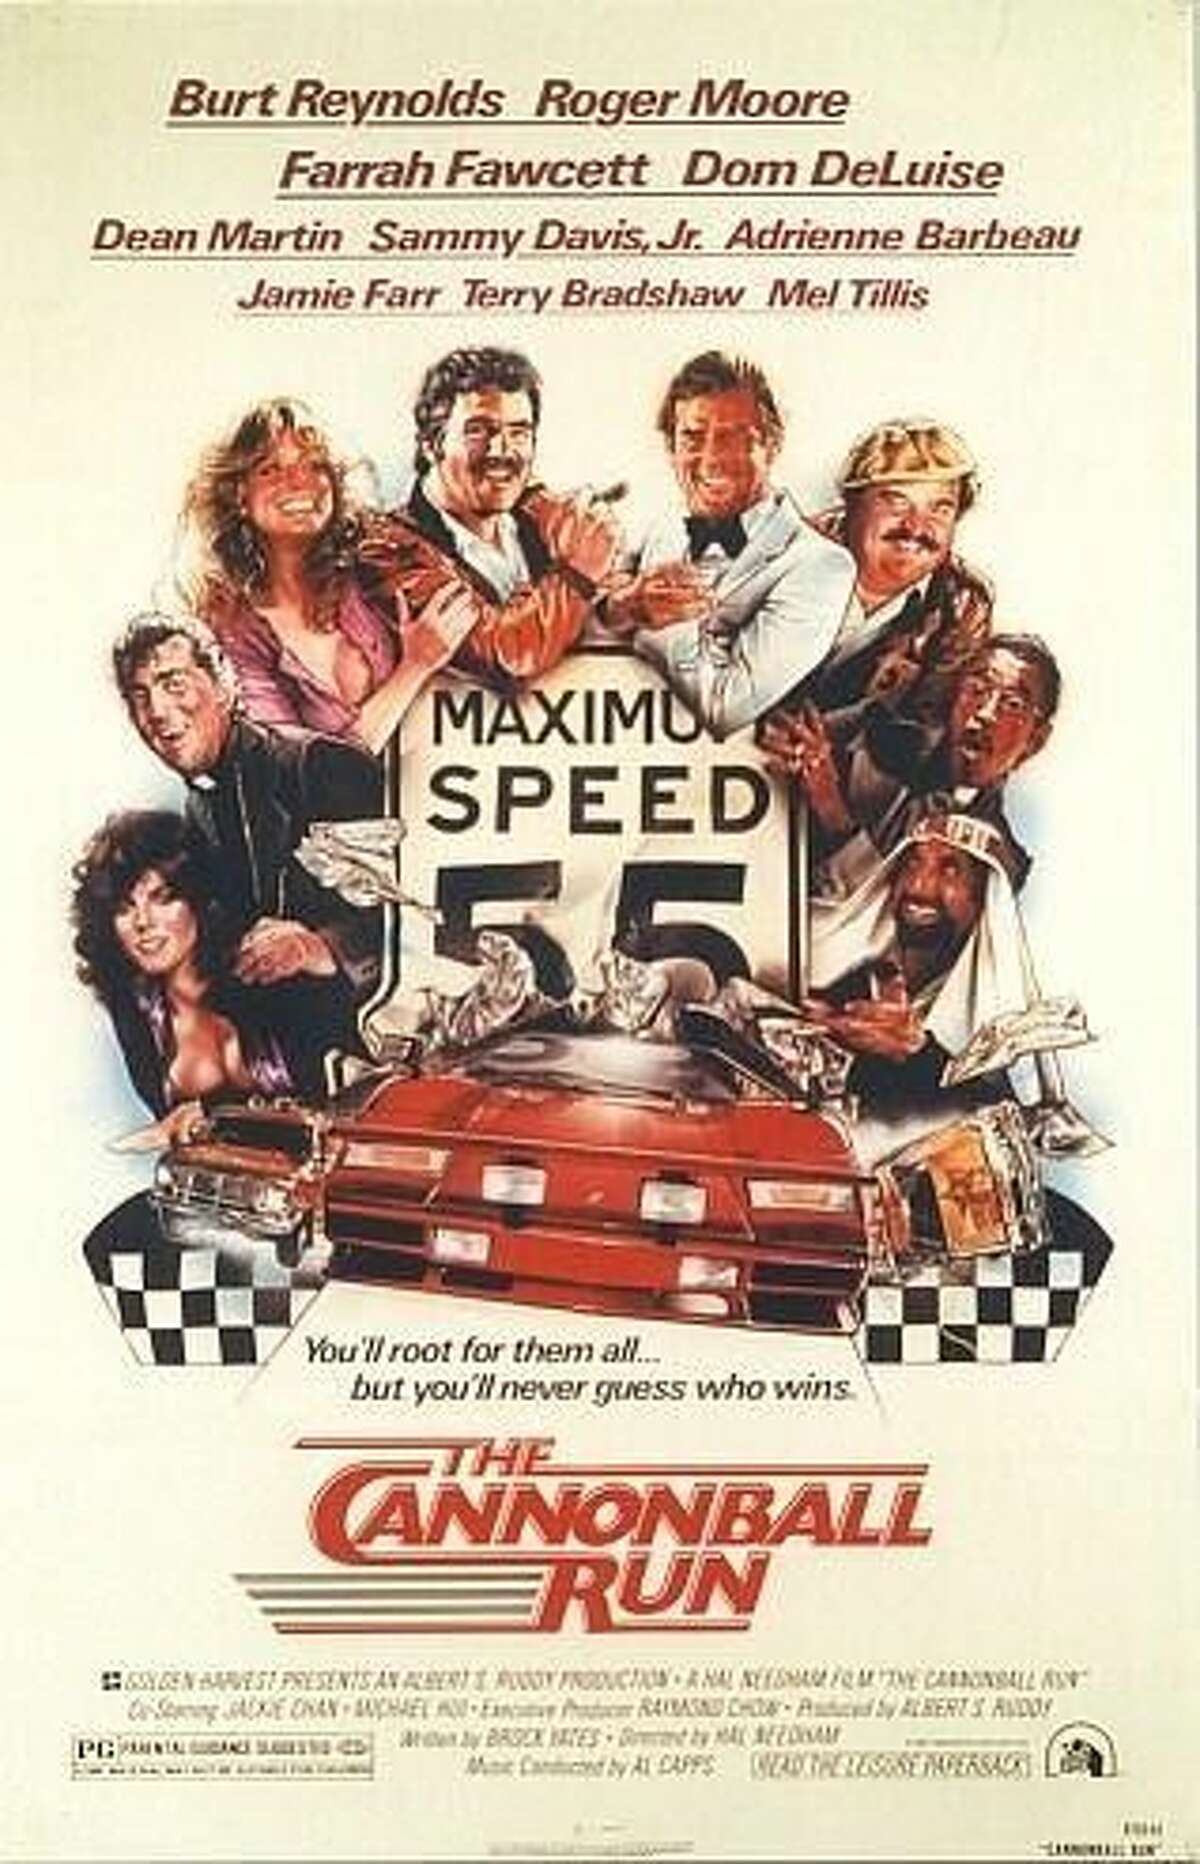 This race was the inspiration for 1981's The Cannonball Run, staring Burt Reynolds and directed by race participant Hal Needham.